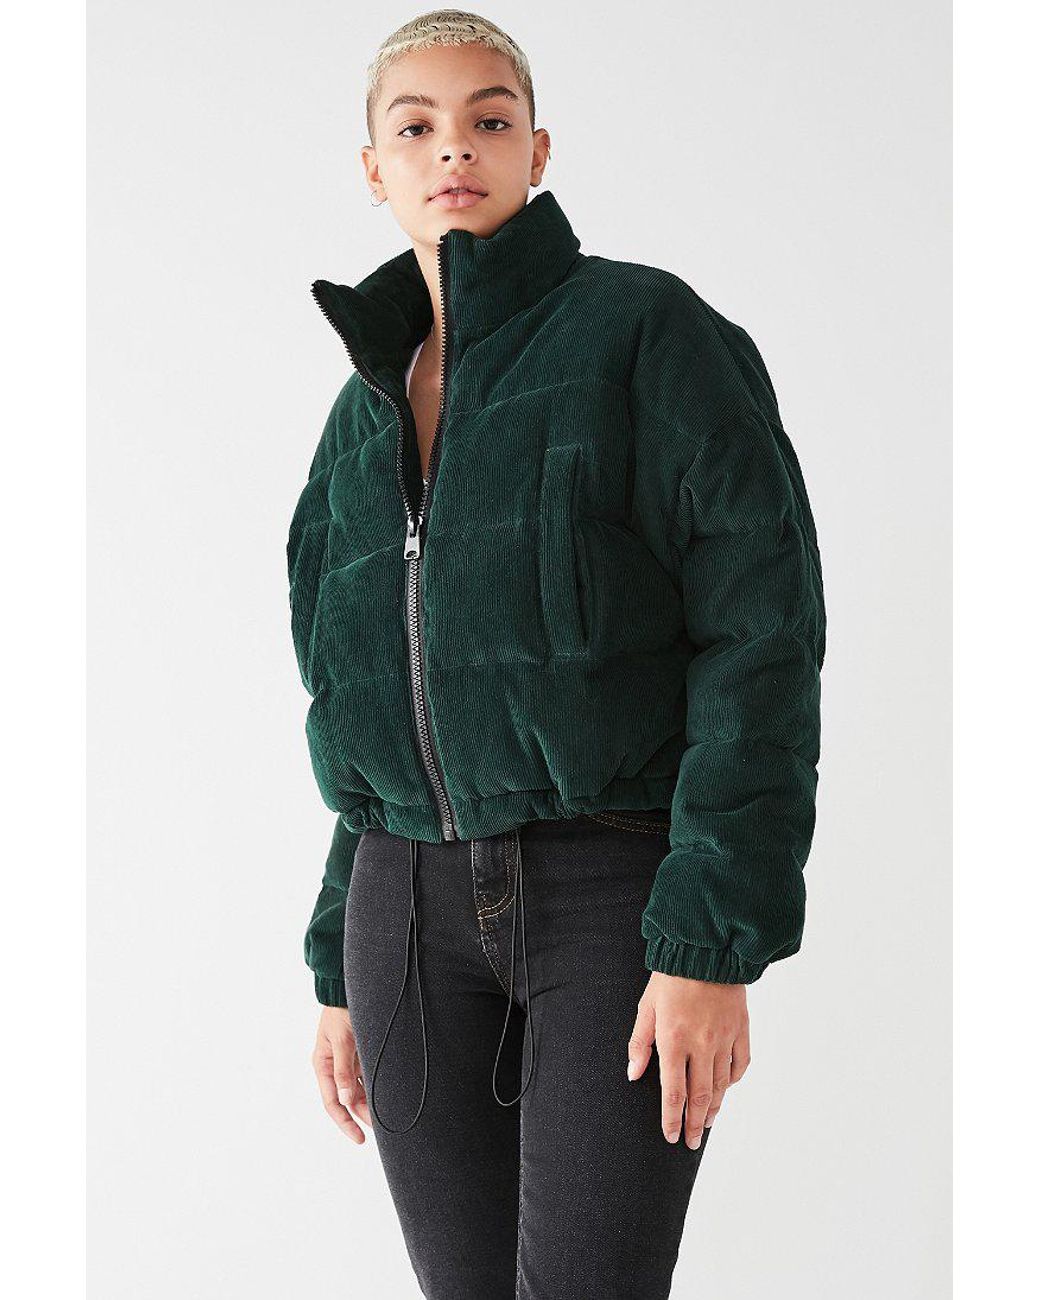 Urban Outfitters Uo Corduroy Puffer Jacket in Dark Green (Green) | Lyst